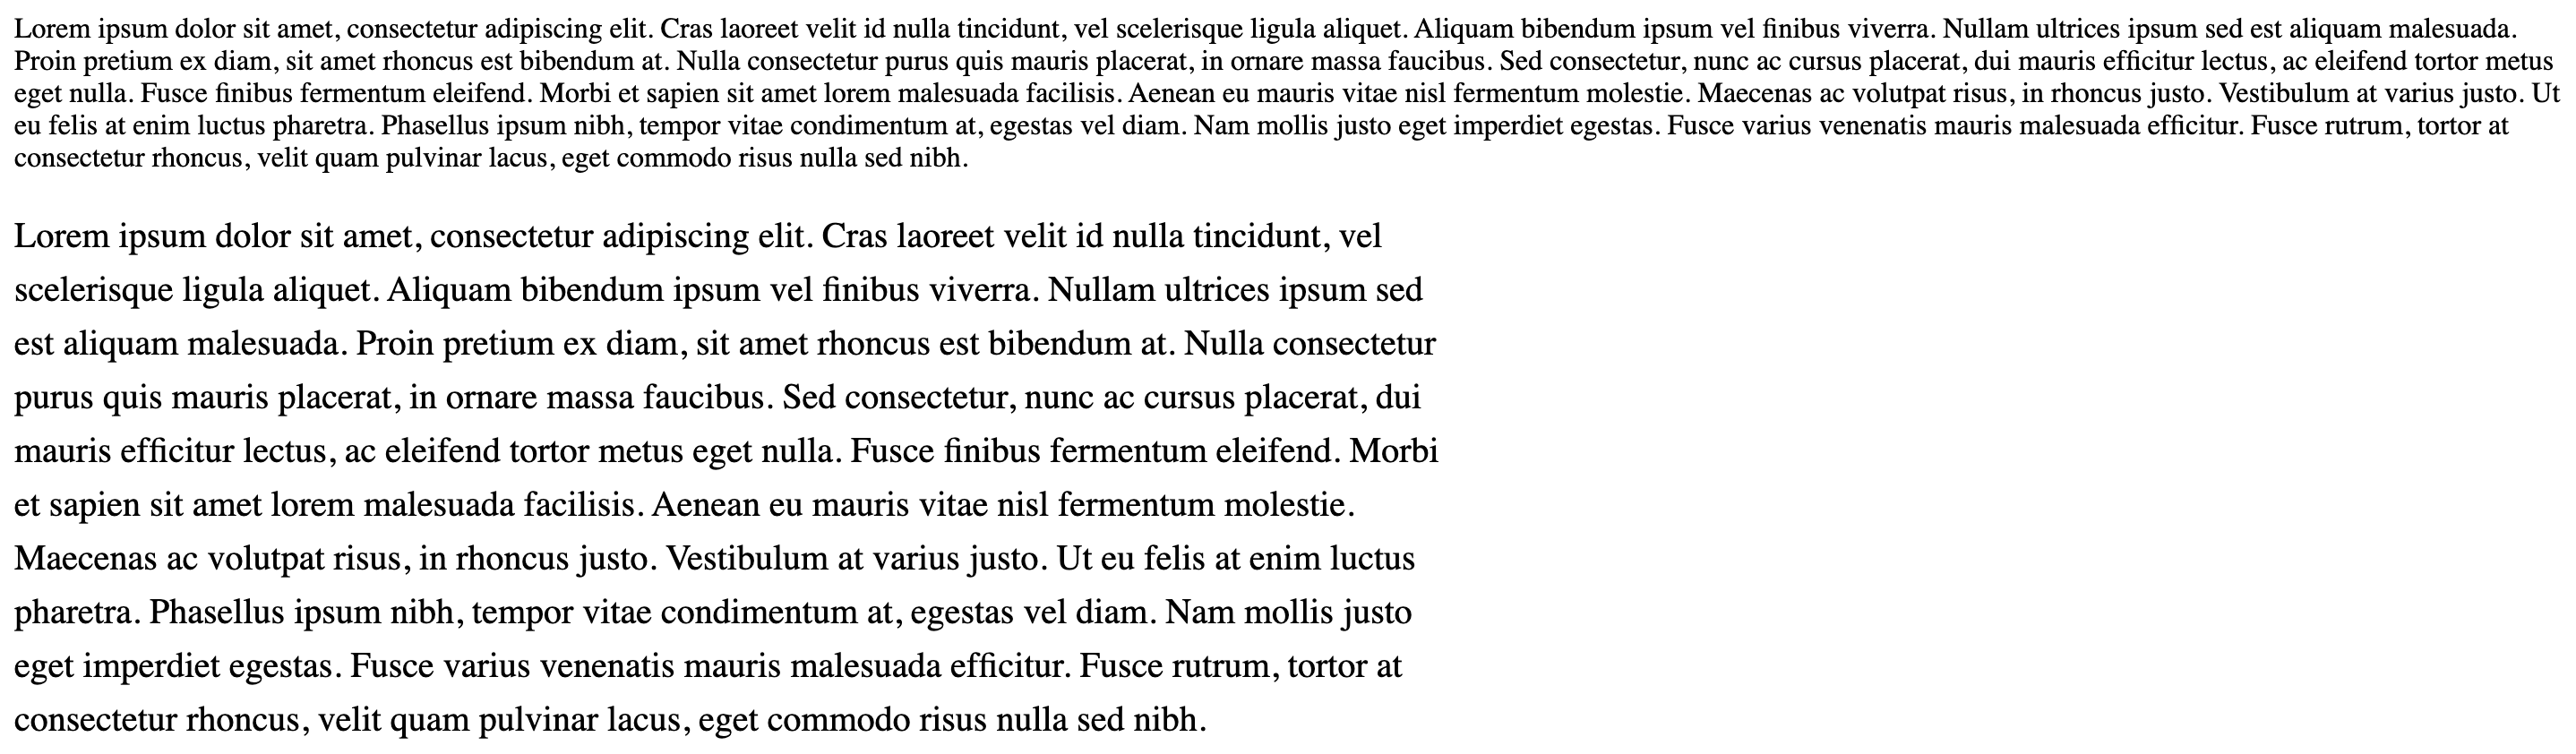 Two paragraphs of Lorem Ipsum, one without styles and another with them